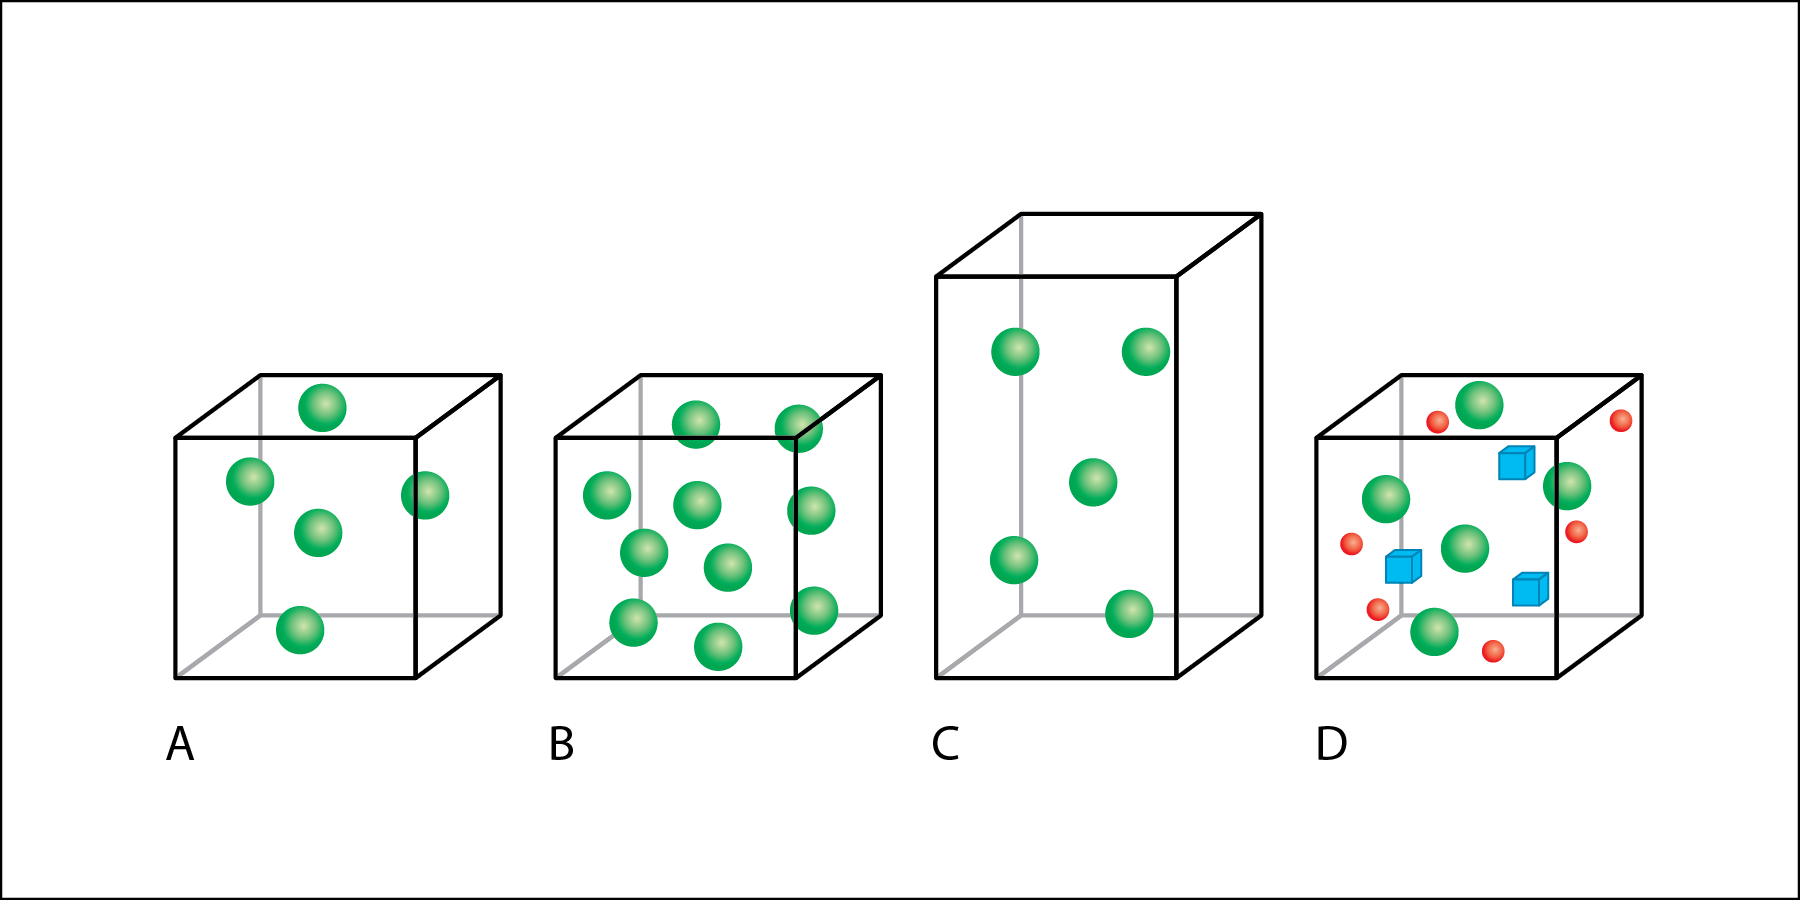 <p><strong>Fig. 2.2.&nbsp;</strong><span style="line-height: 1.538em;">The boxes and colored shapes in this figure demonstrate the effects of changing mass and volume on density.</span></p>